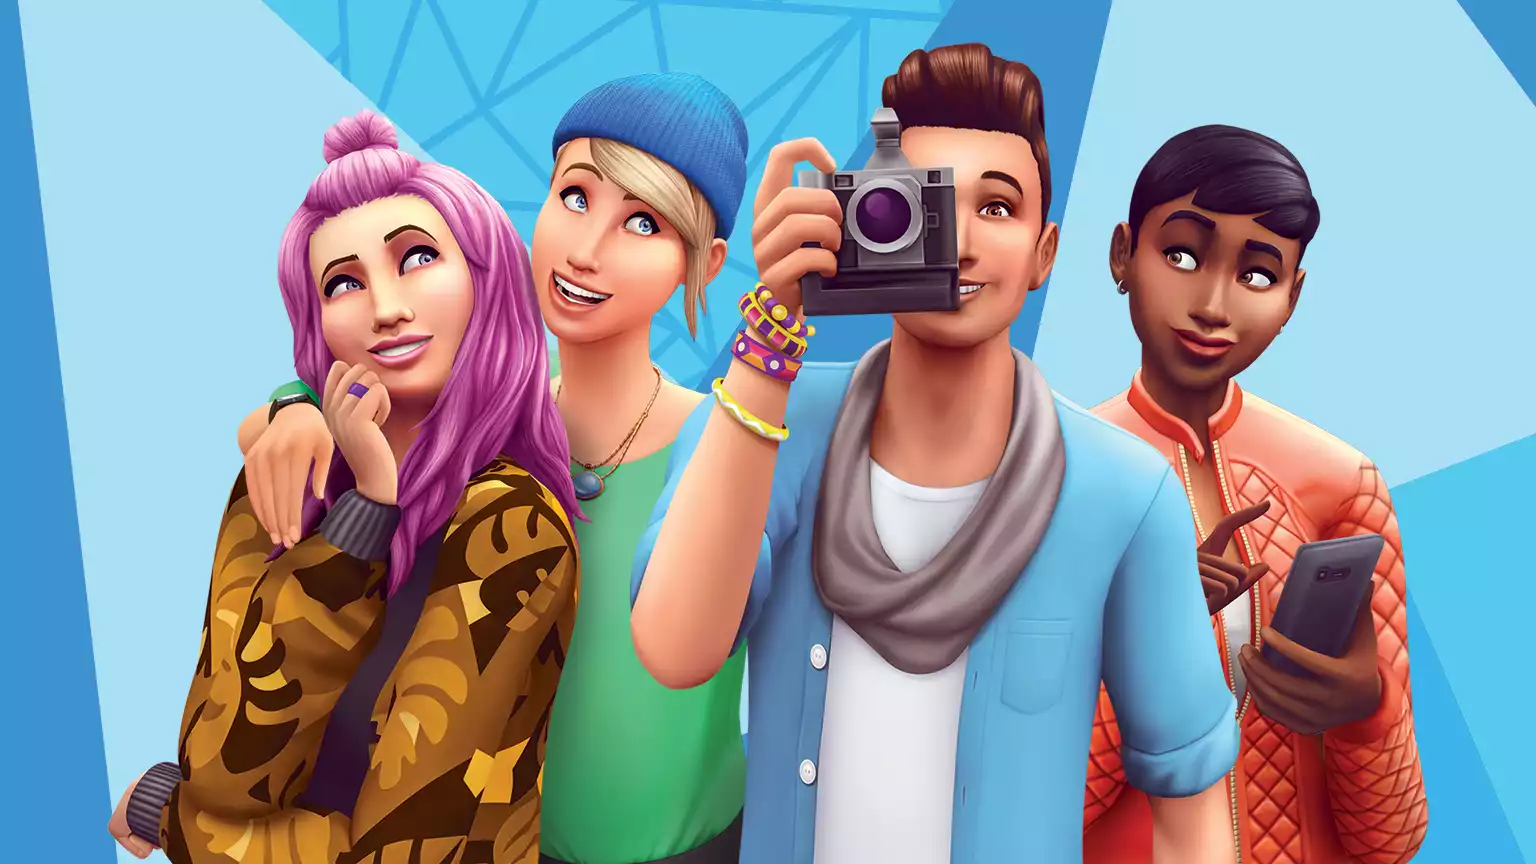 17 best games like The Sims to play in 2023: Animal Crossing, Stardew Valley & more